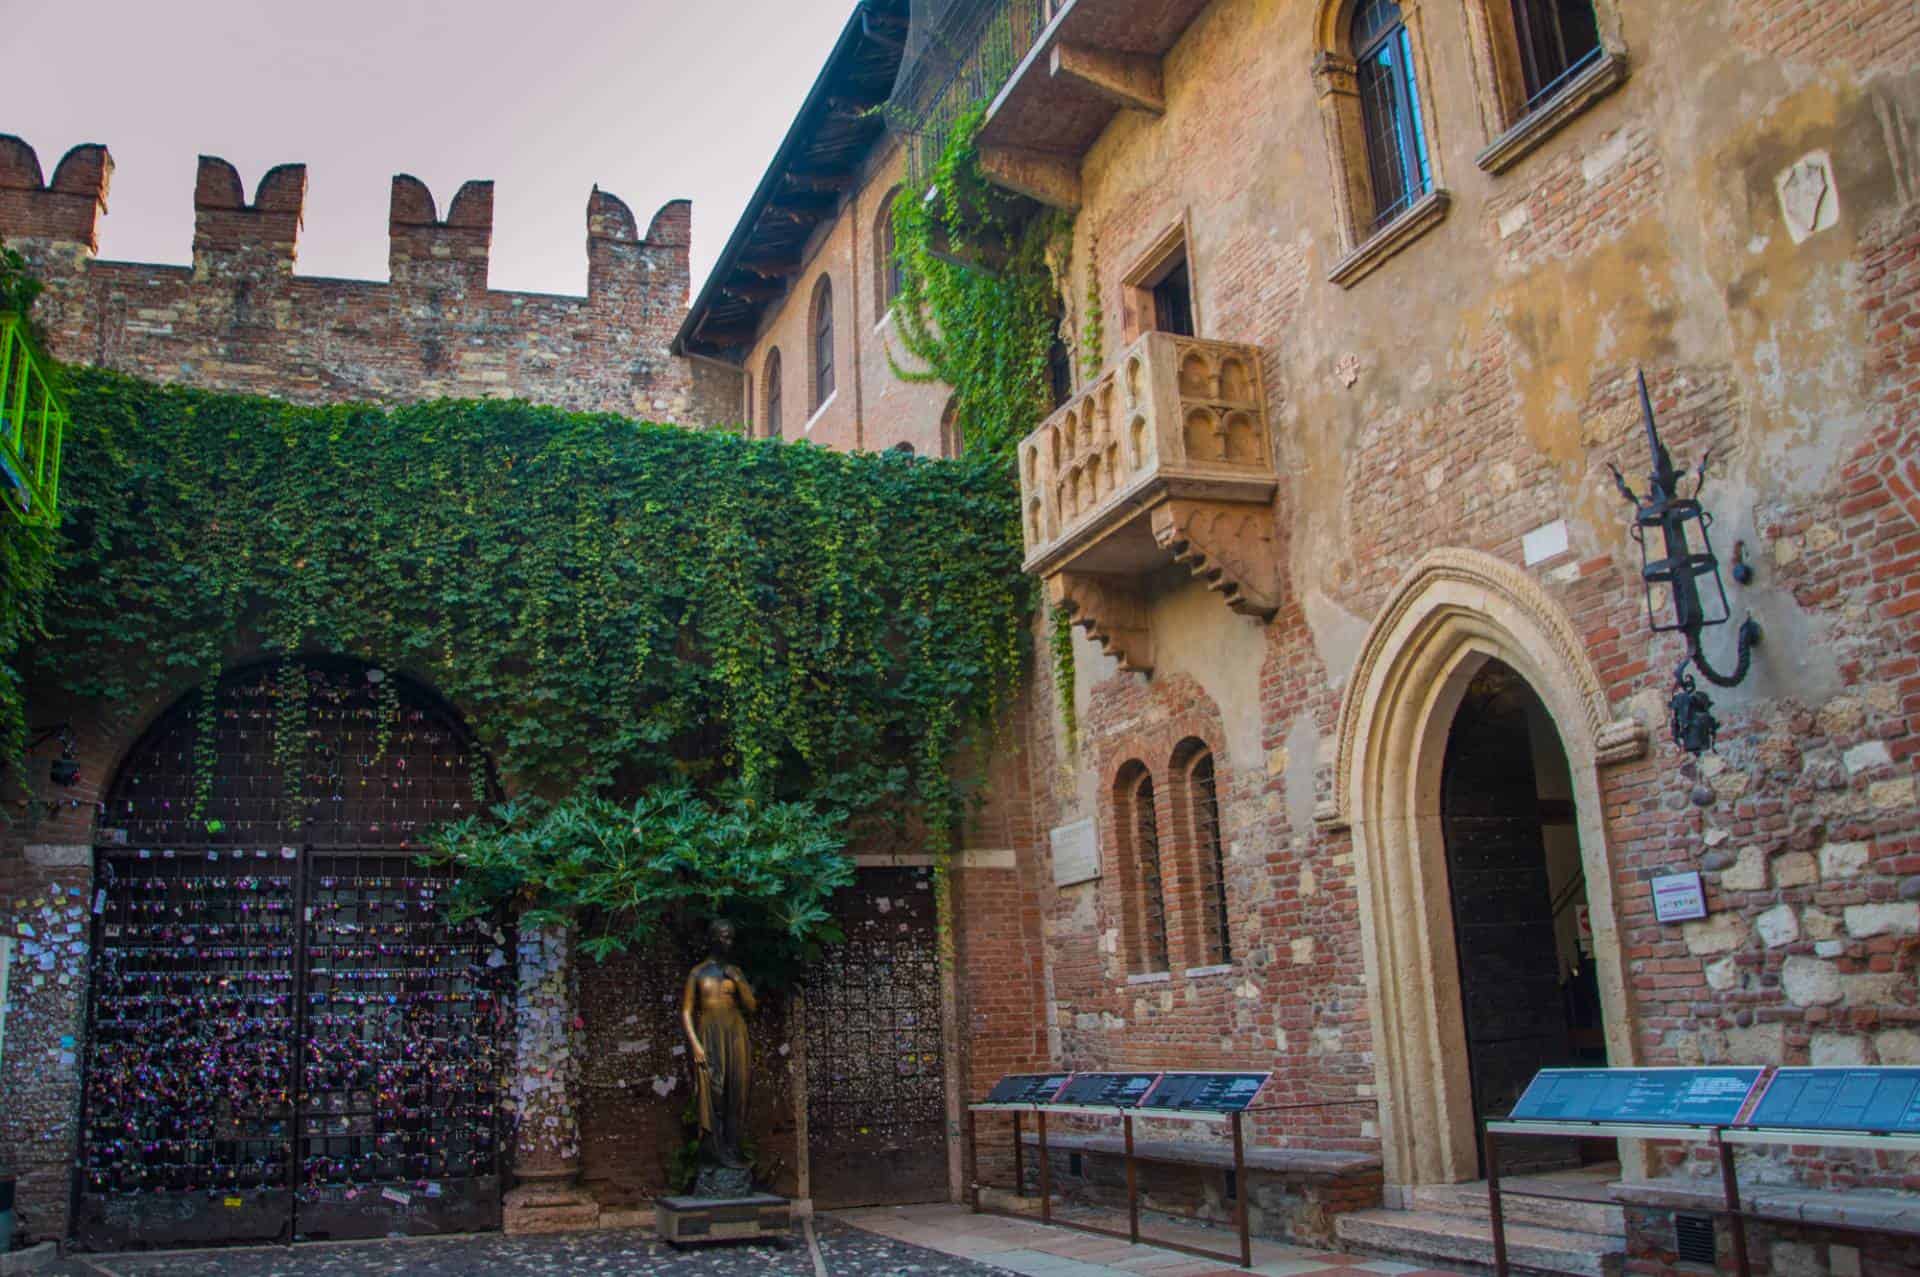 Exactly where in Verona did Romeo and Juliet live?